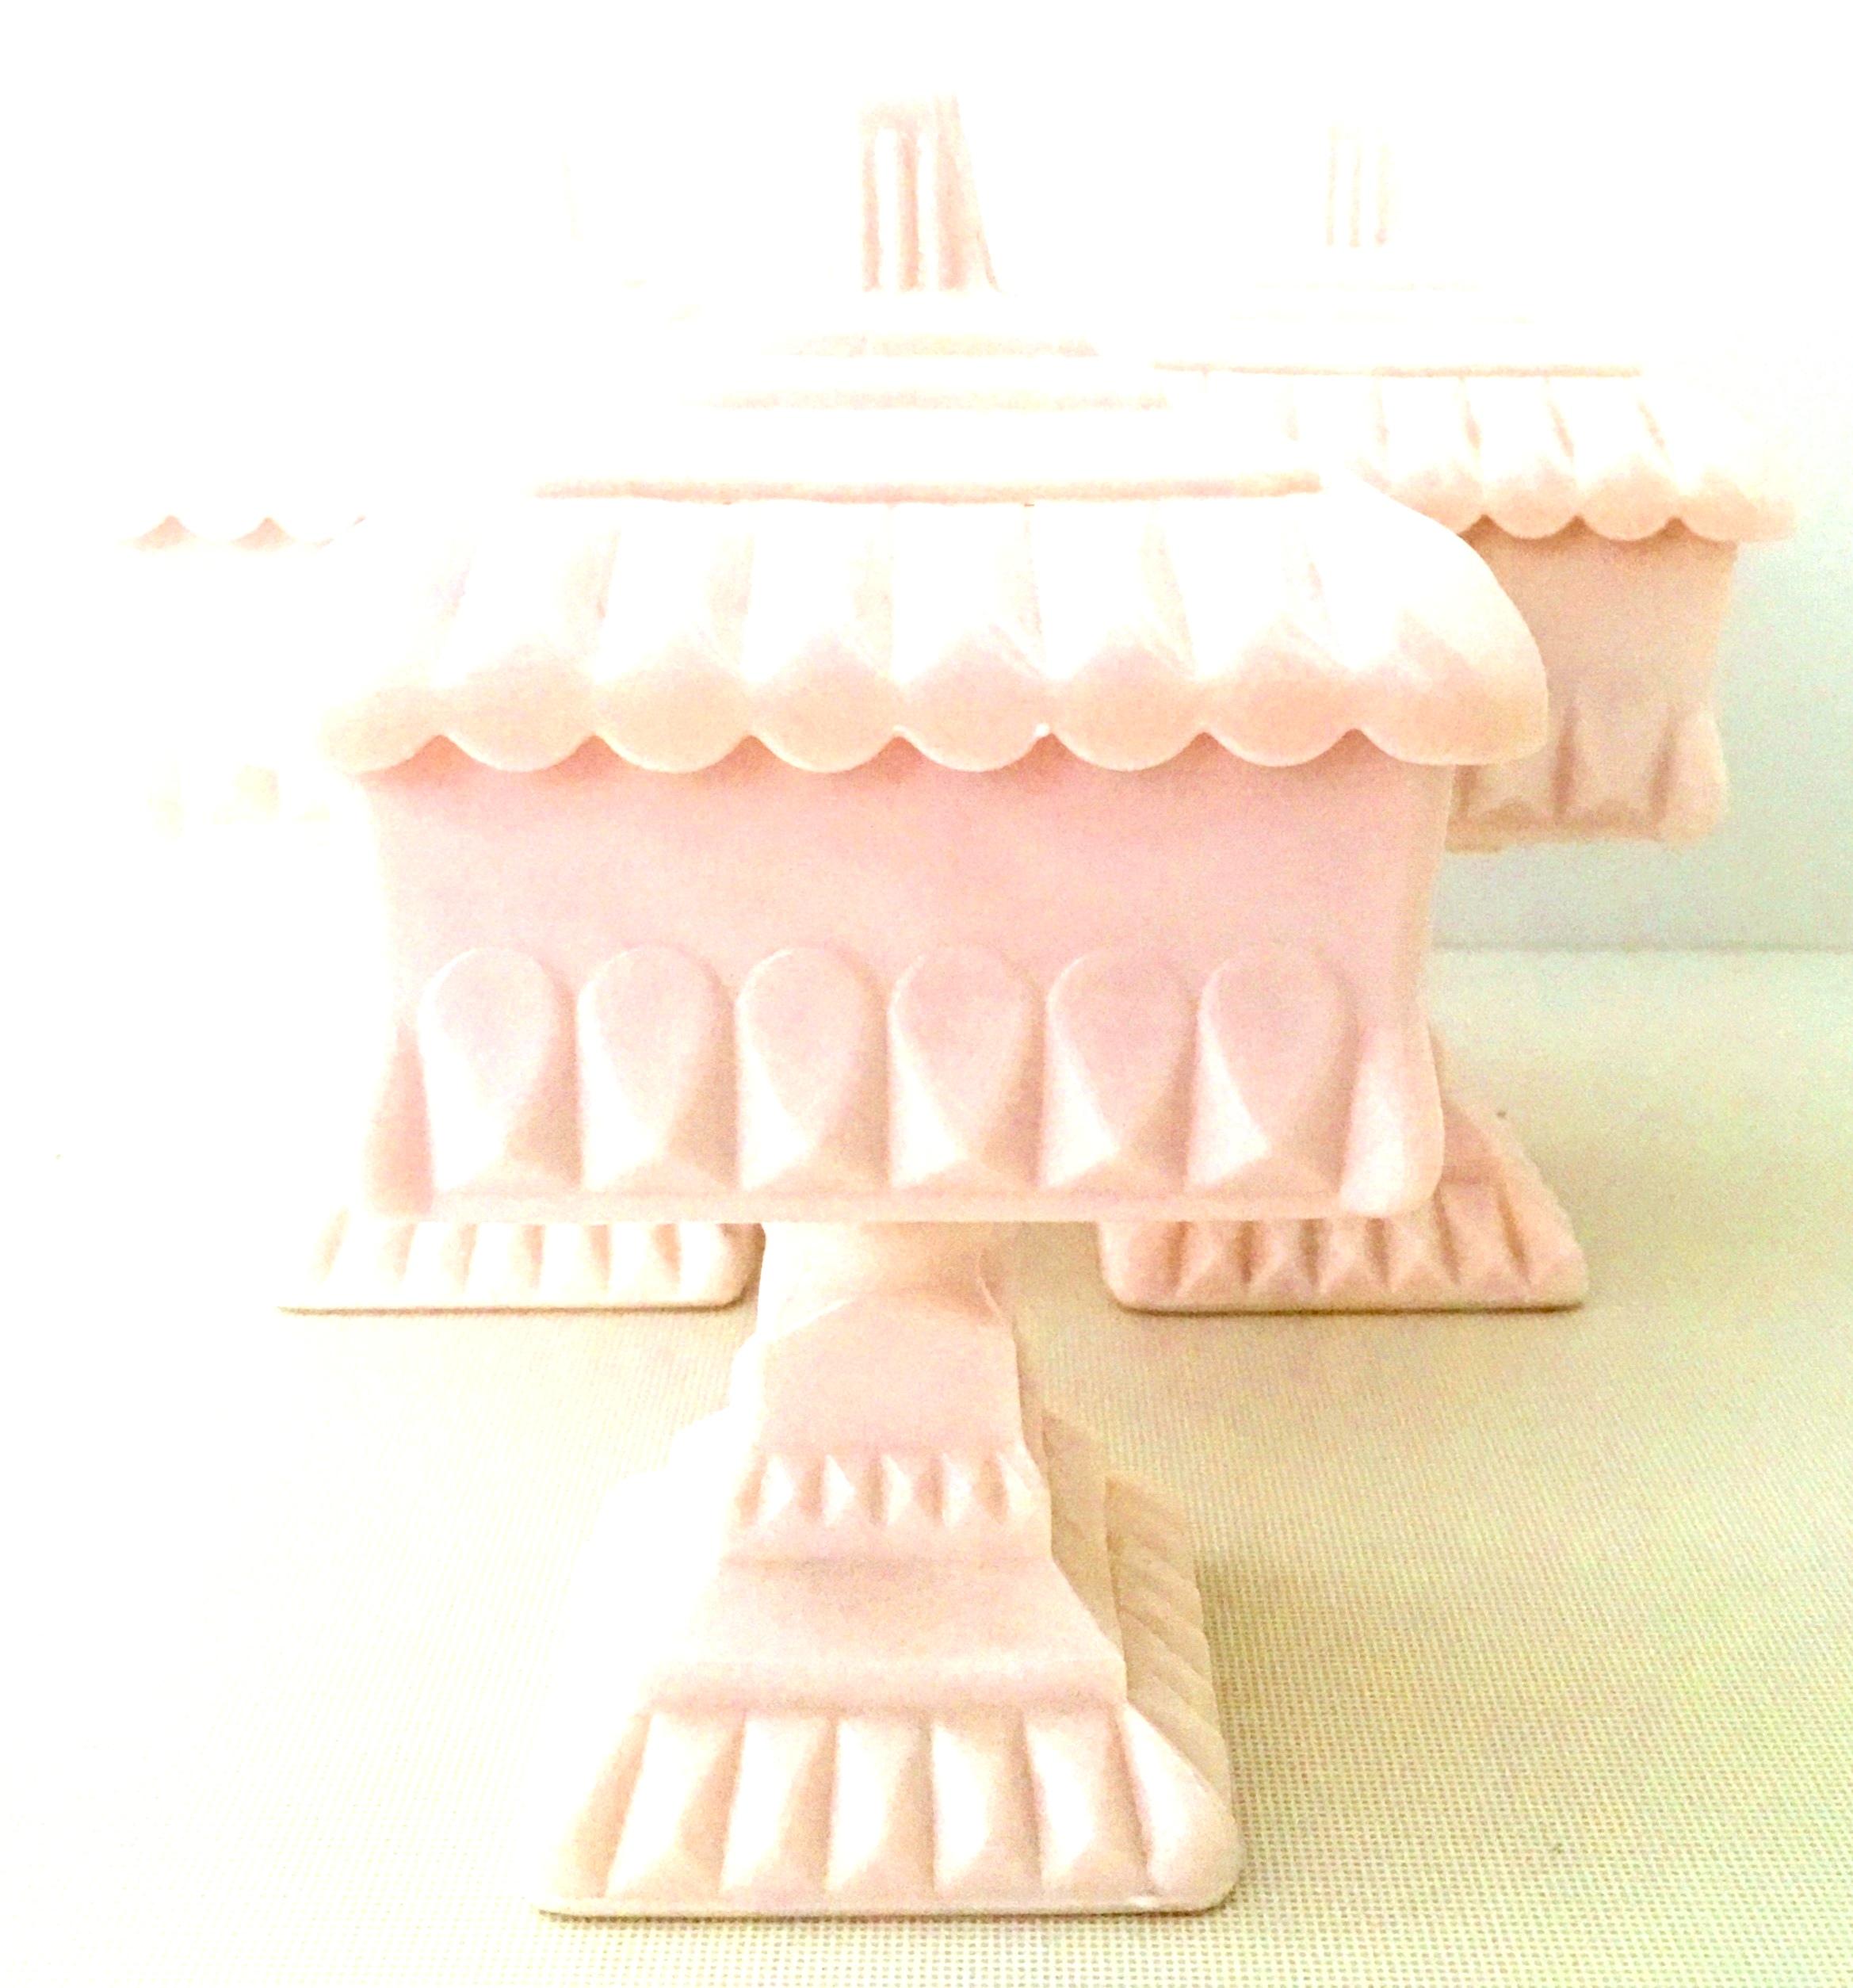 Mid-20th century pink milk glass footed bowls, set of three pieces. Set includes three pink milk glass footed and lidded square bowls.